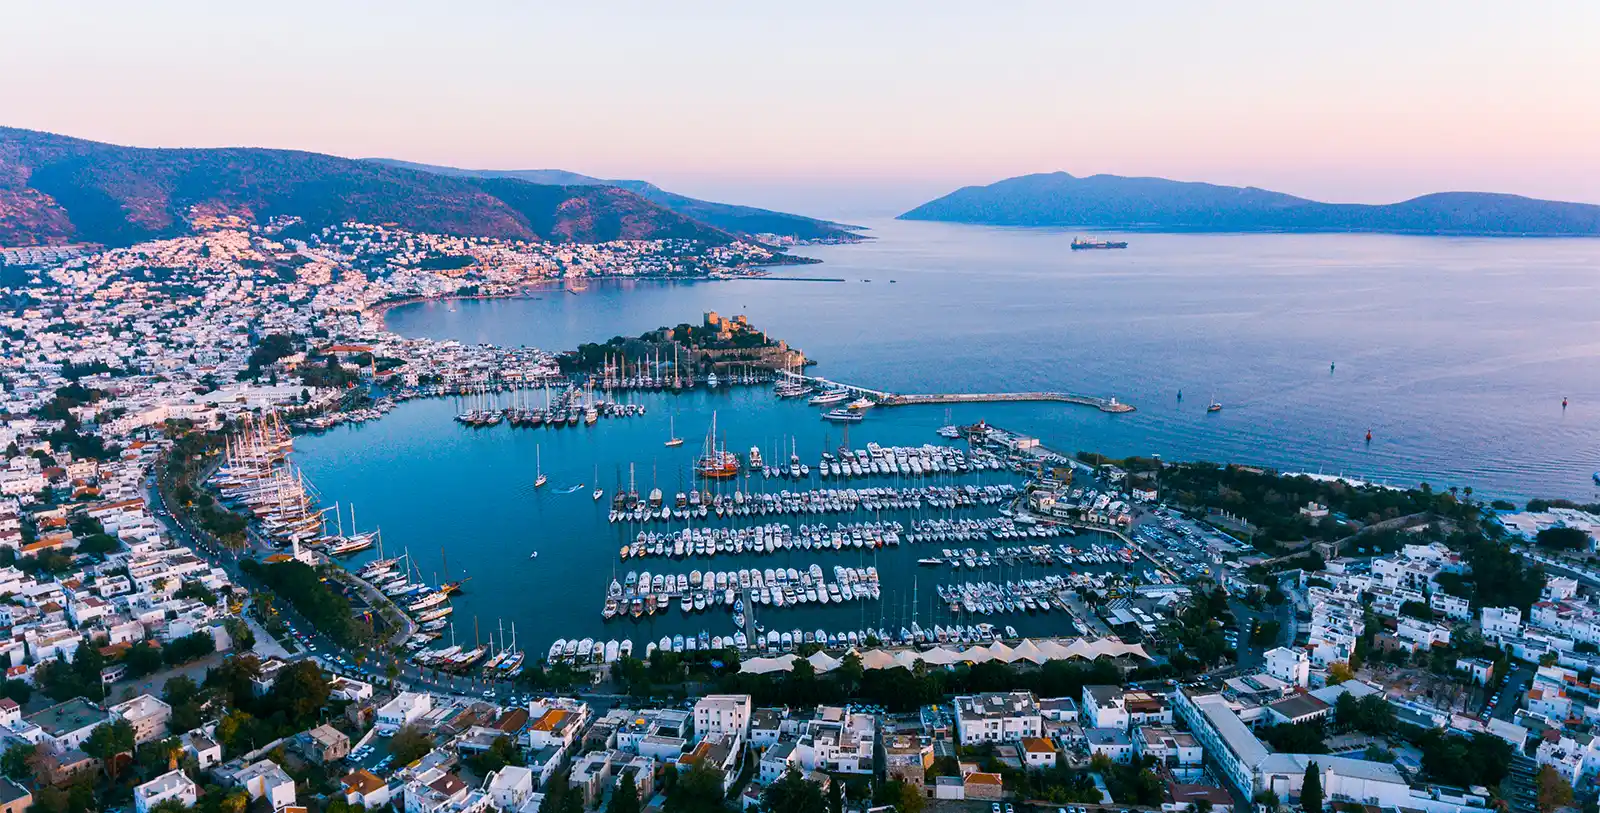 Bodrum is a great place to visit and live in. A beautiful landscape of Bodrum during sunset with sea and green spaces.